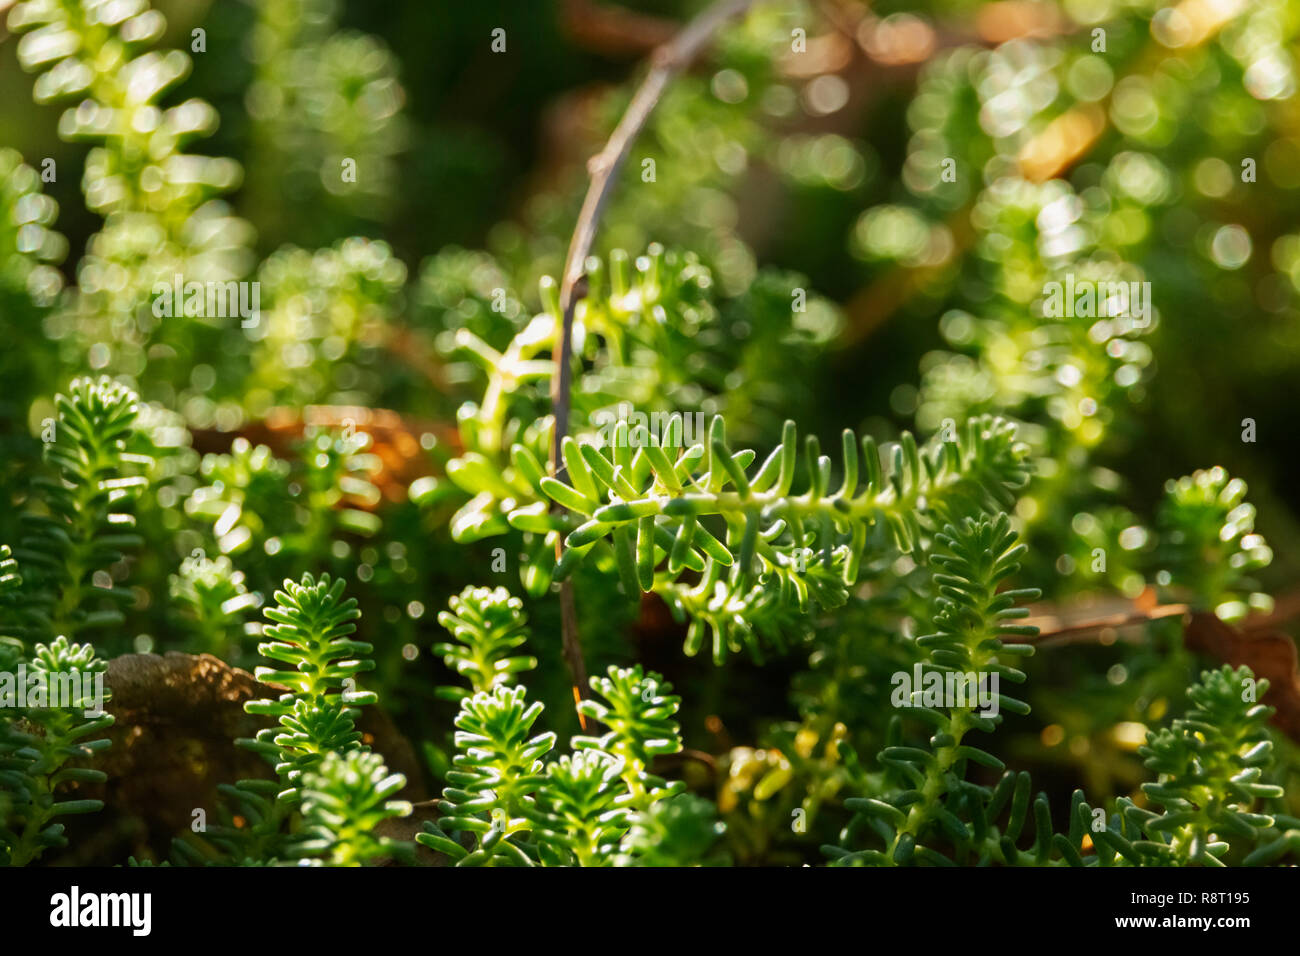 Green gold moss stonecrop also called sedum acre plant ,the leaves are shortly cylindrical with rounded tip , high contrast Stock Photo